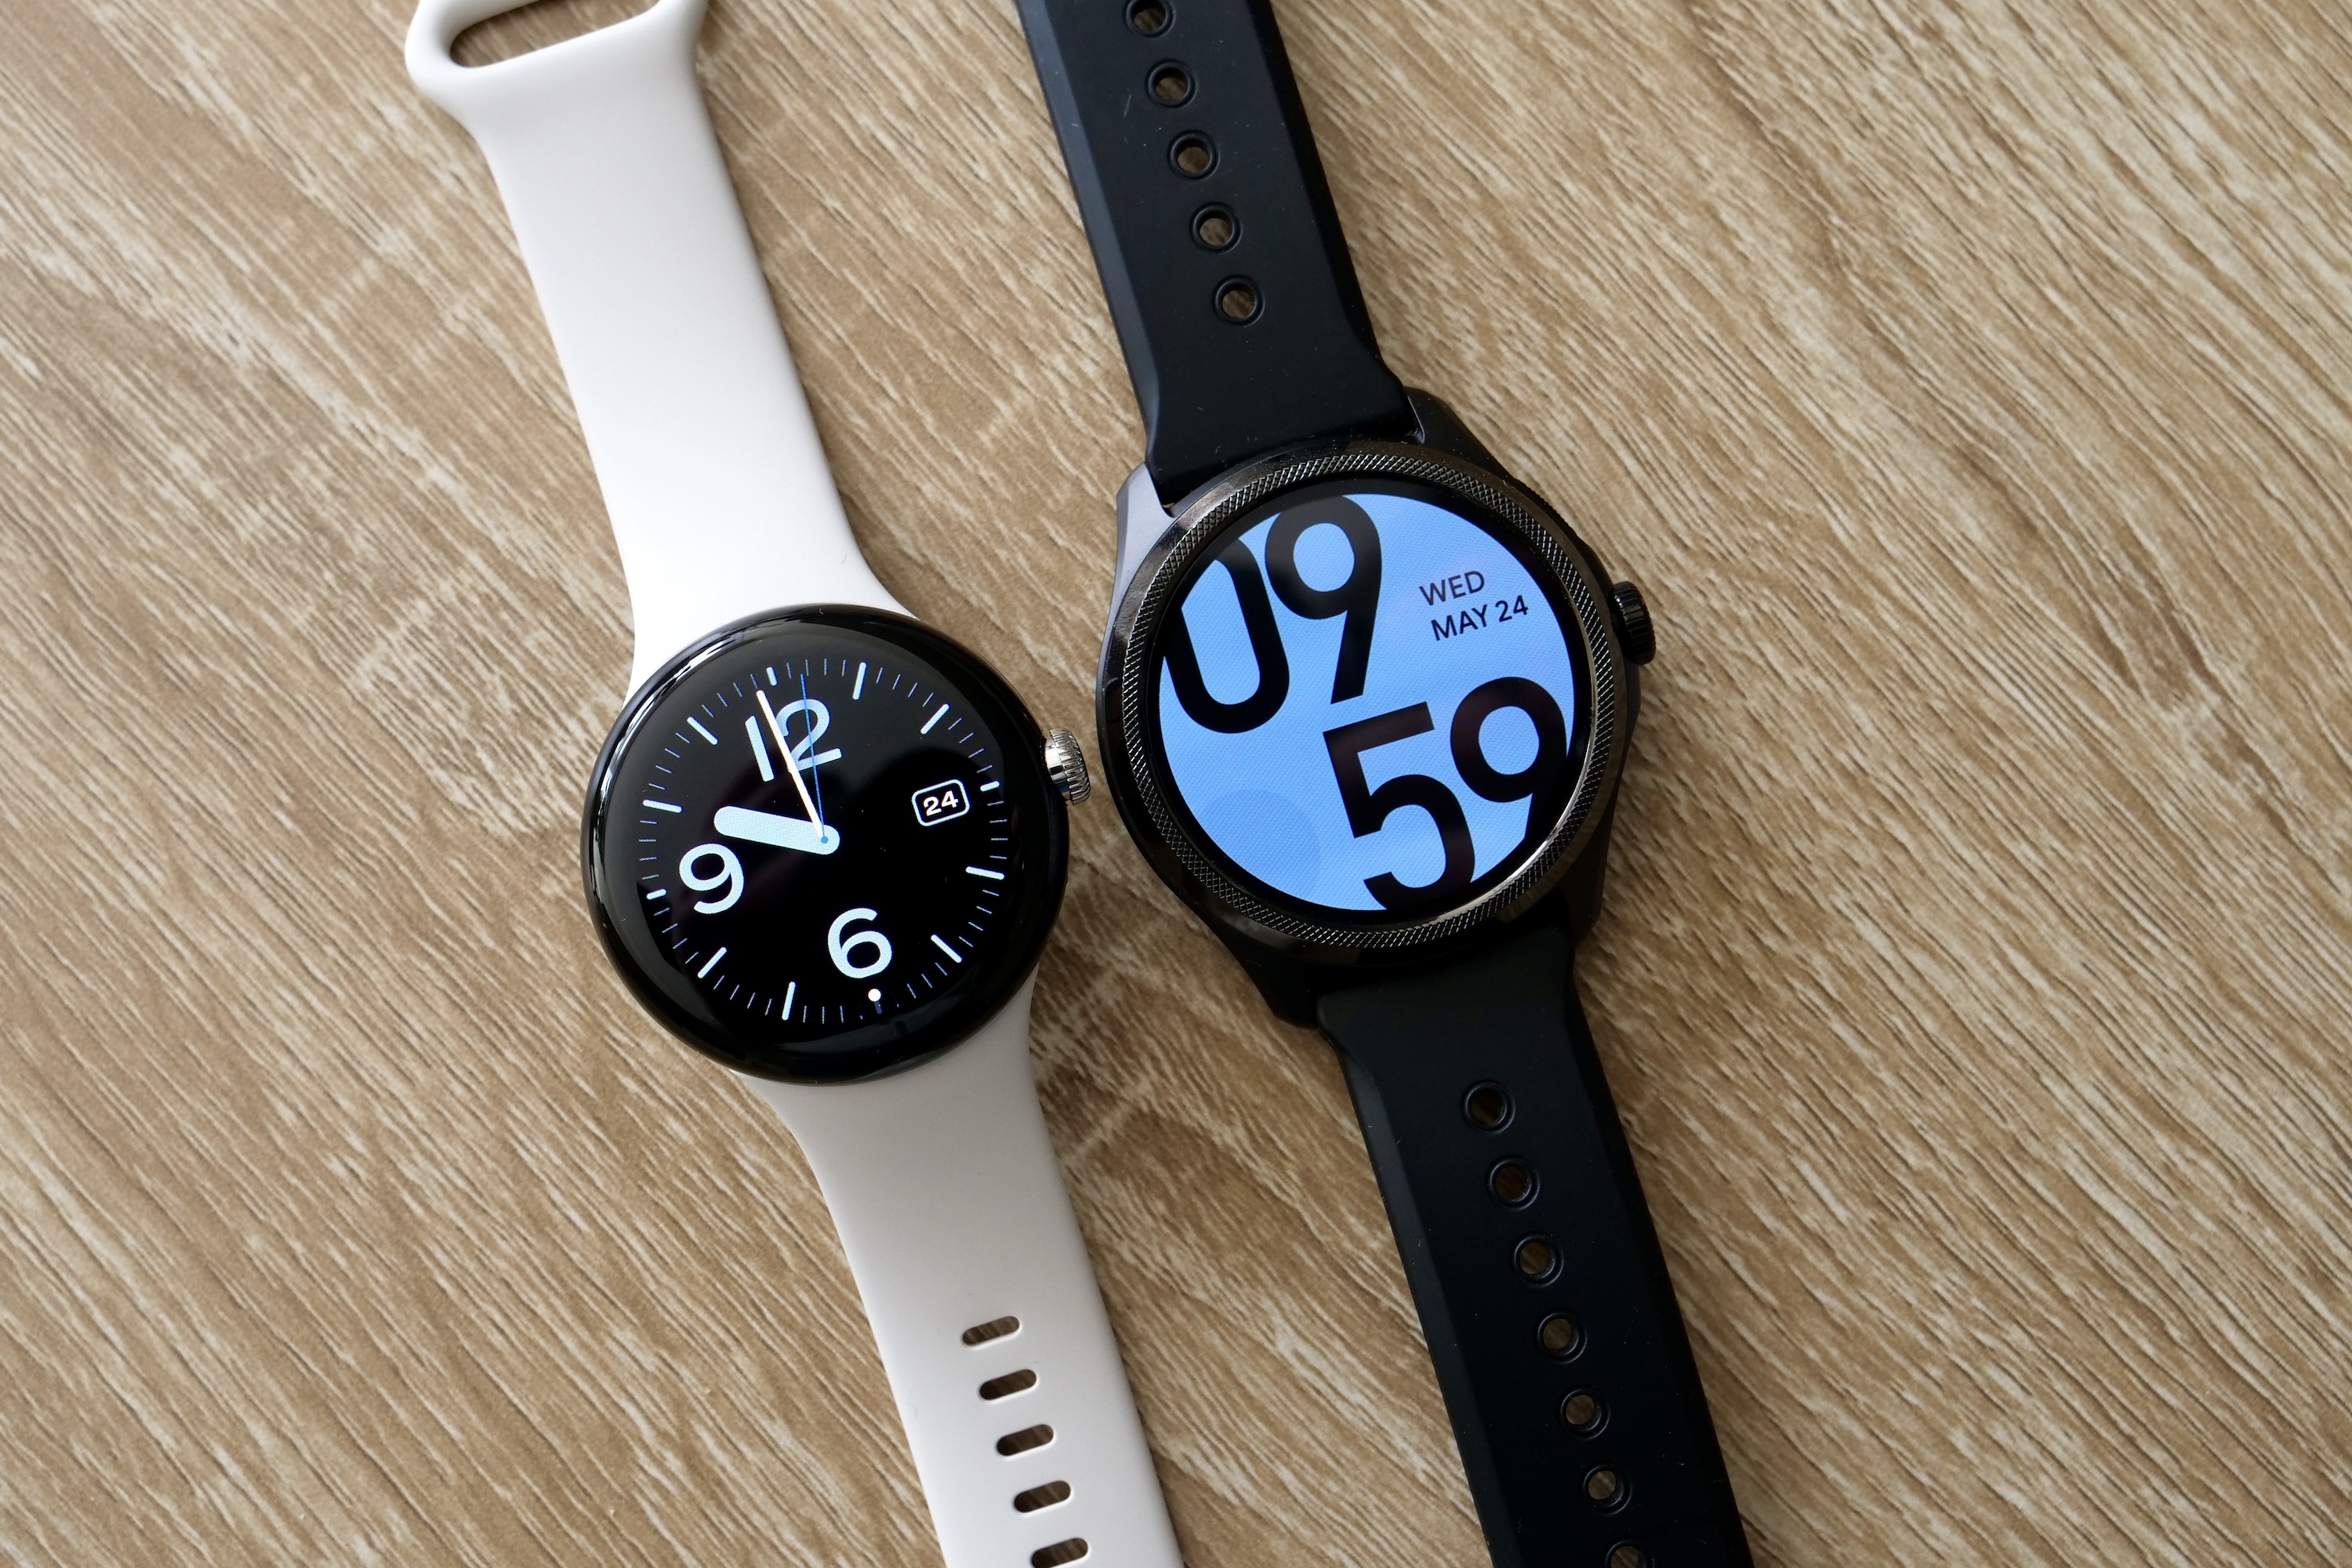 The Pixel Watch has been utterly crushed by its latest rival